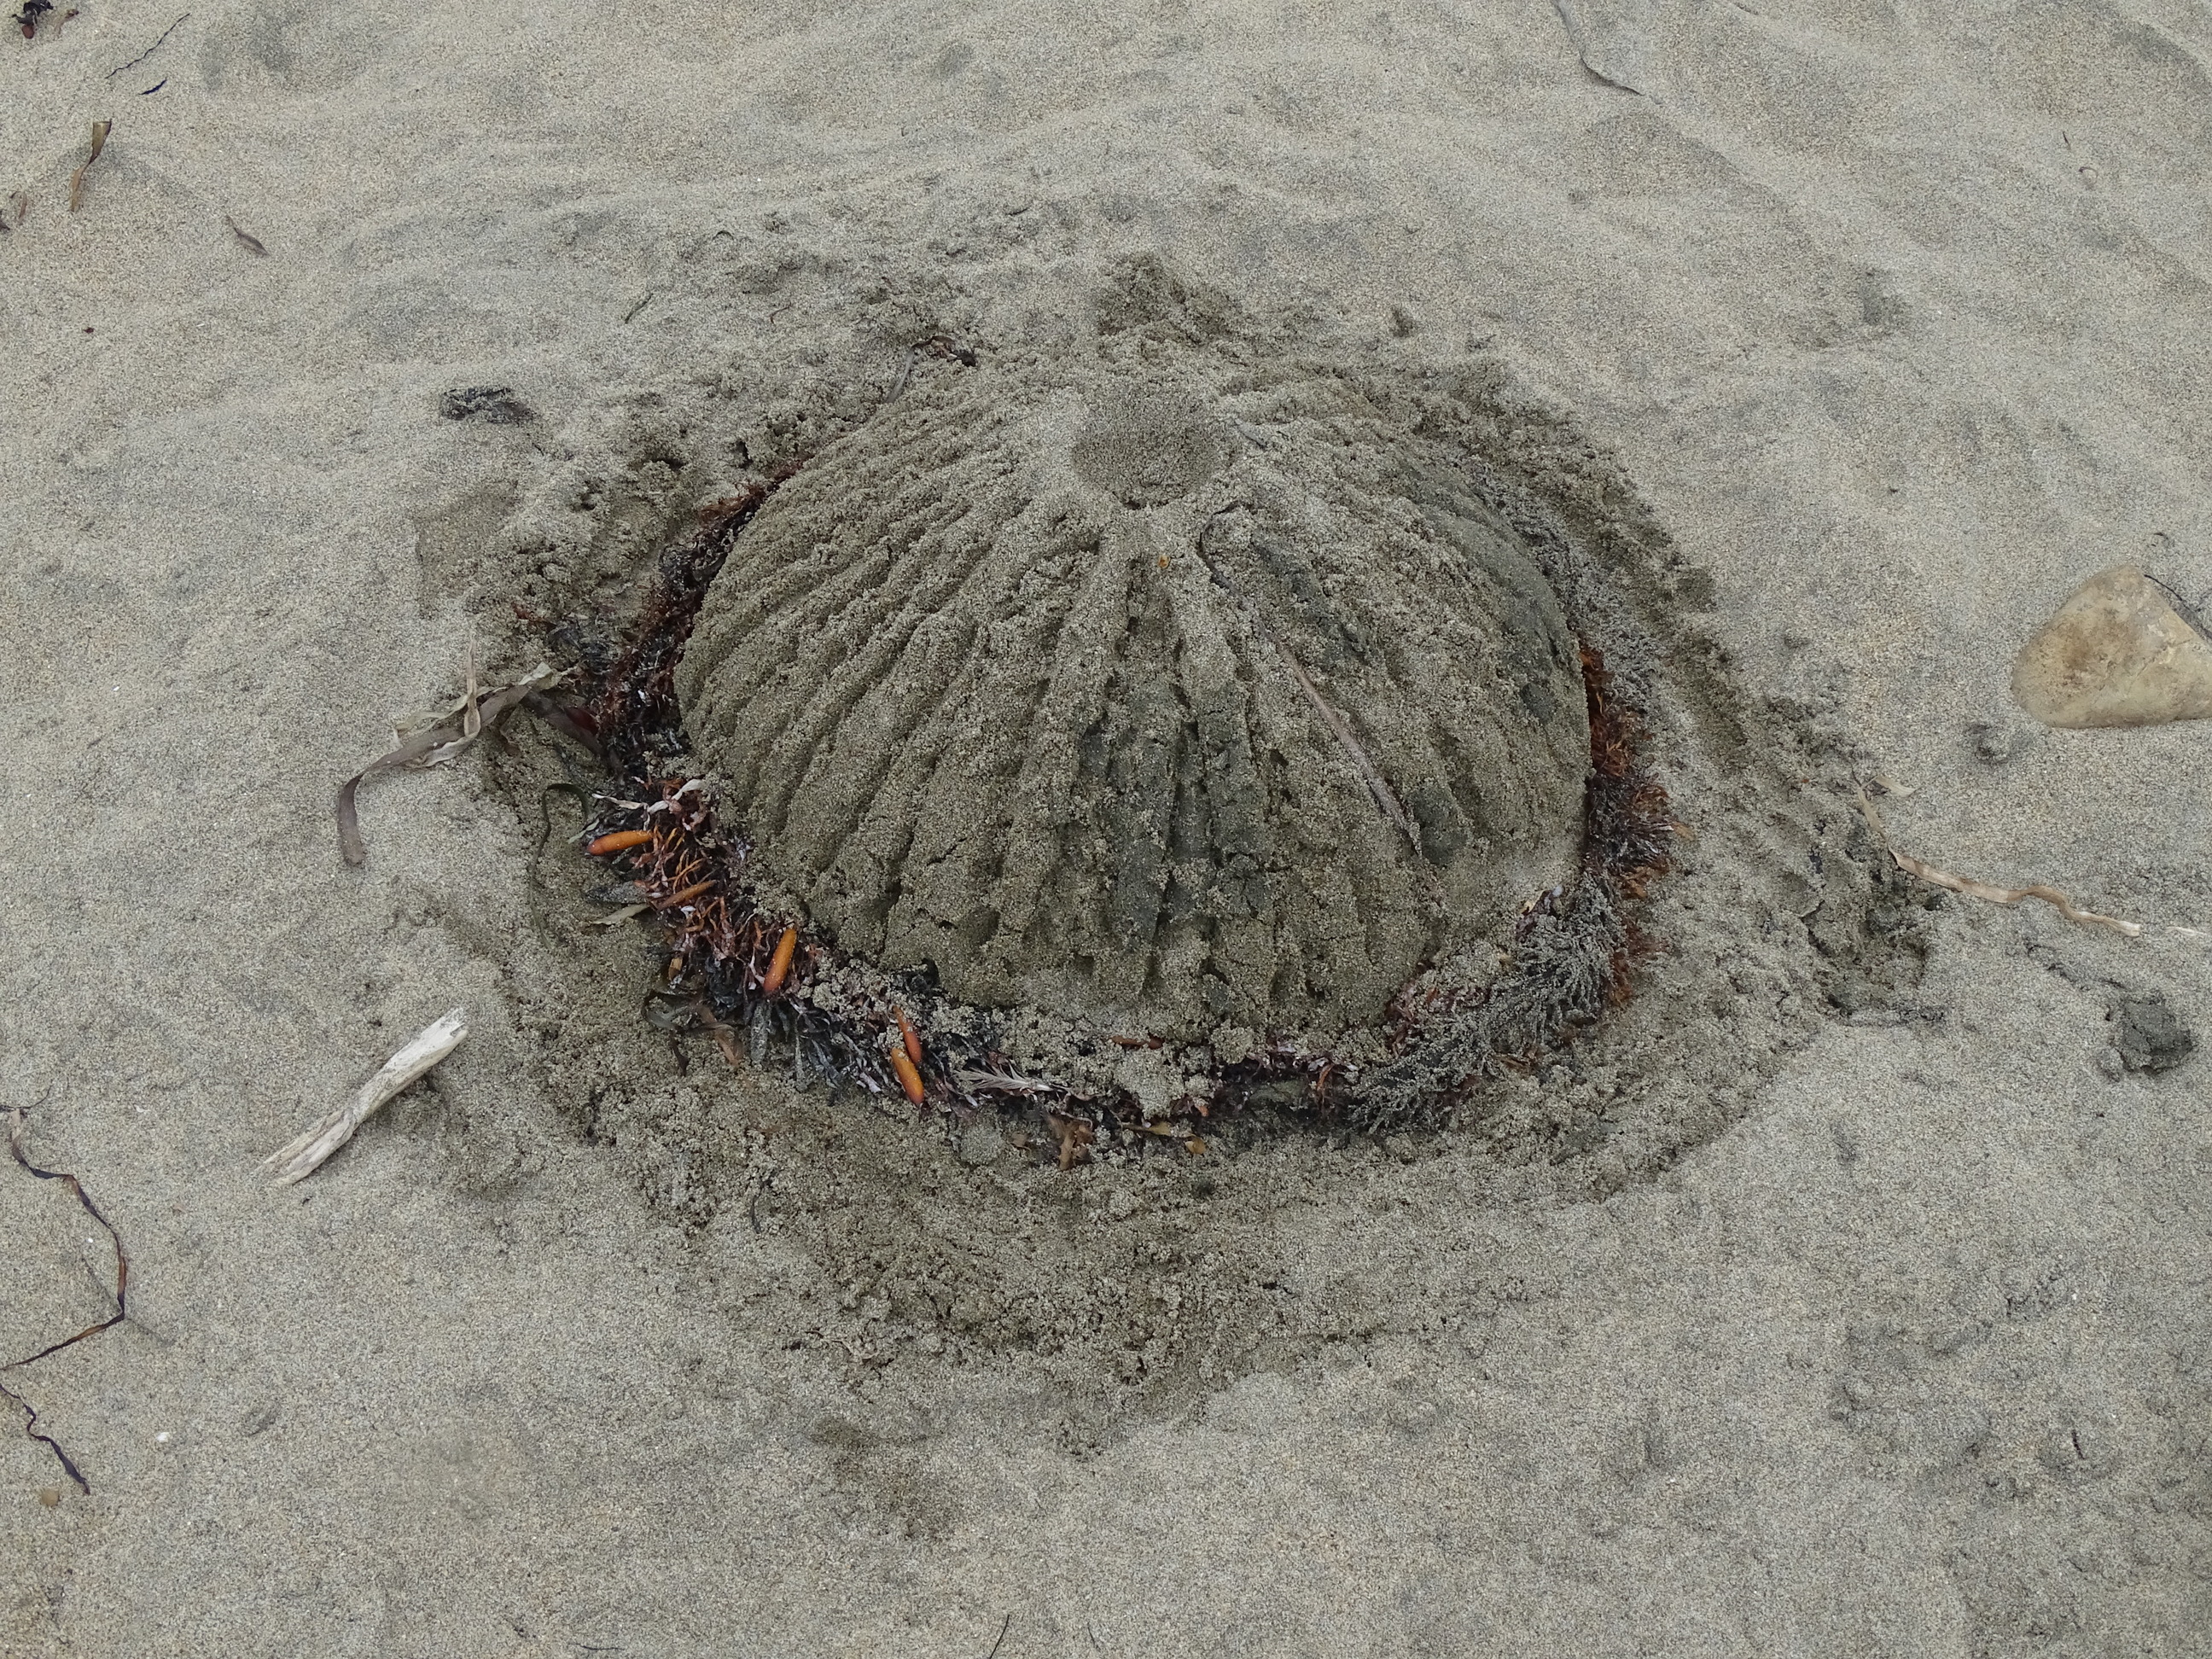 A small sand sculpture of a sea urchin.